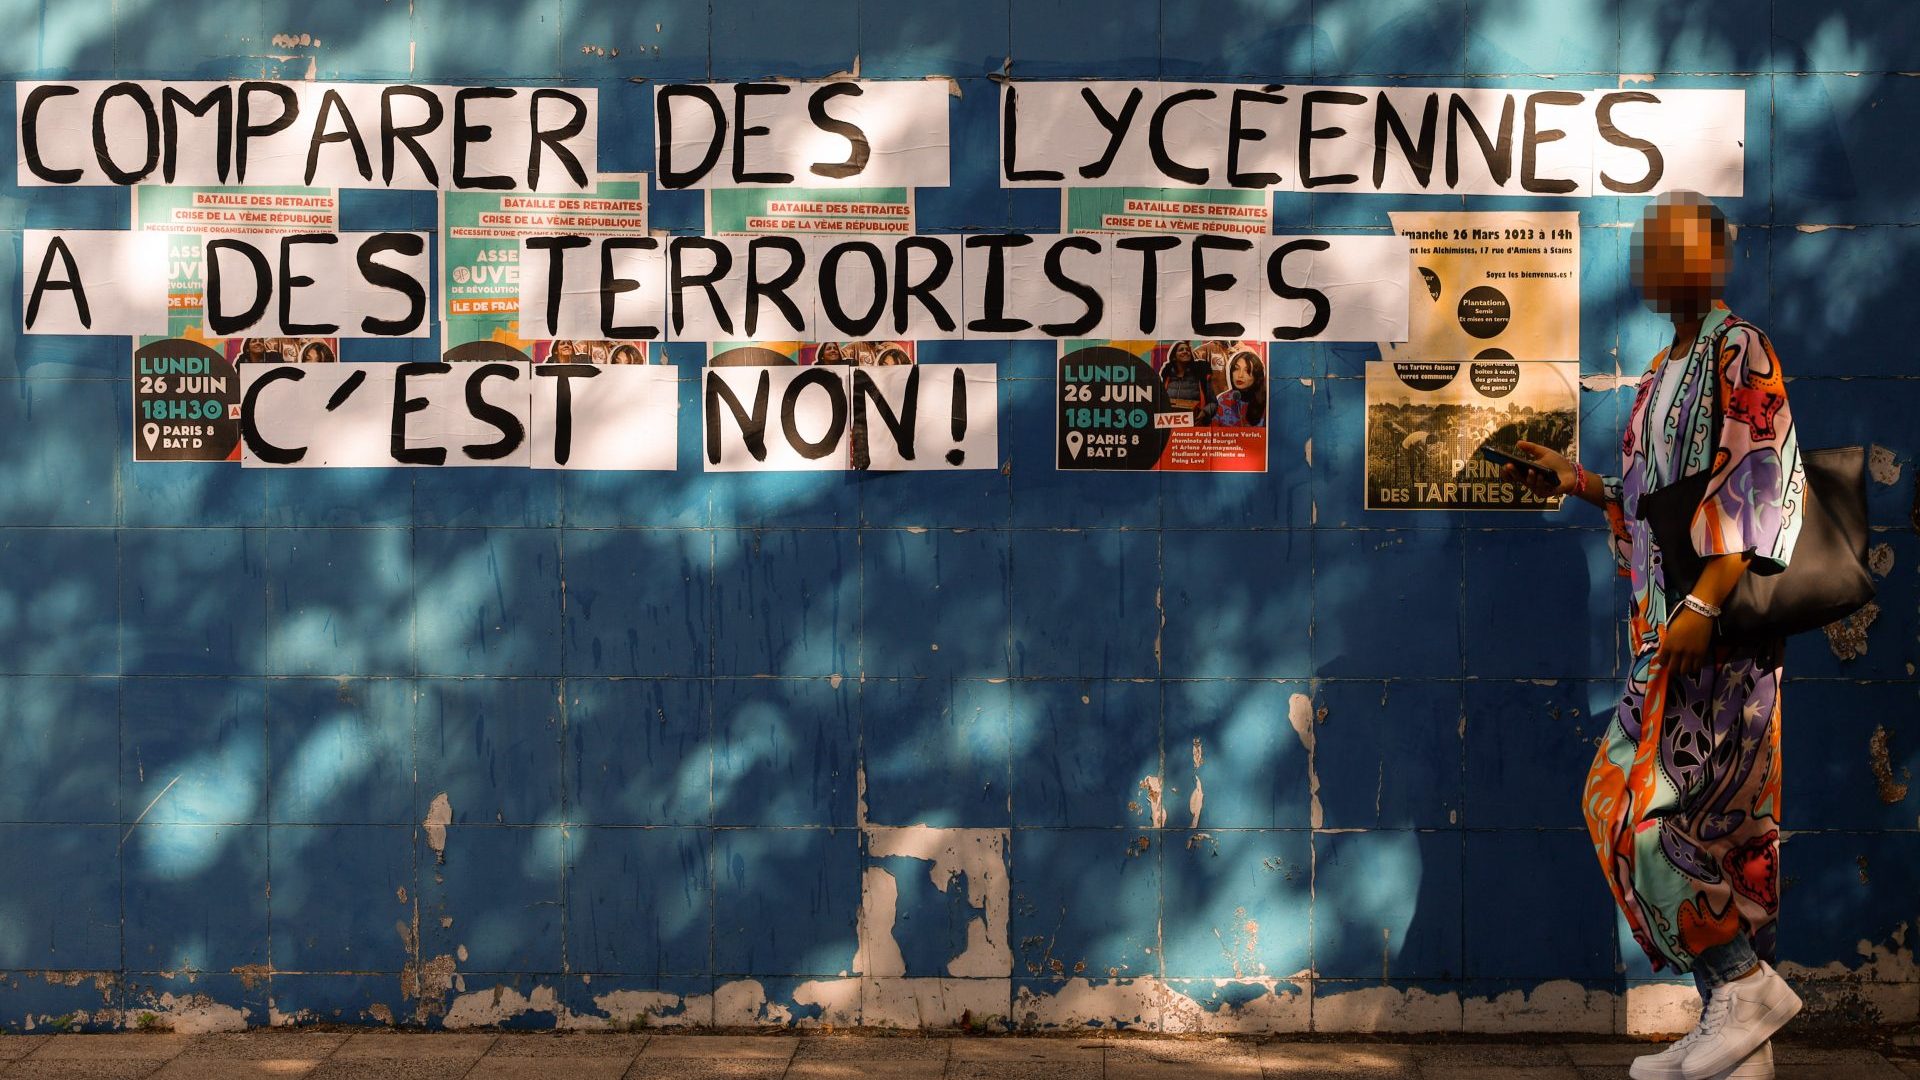 Staff at the Maurice-Utrillo high school in Seine-Saint-Denis, Paris, organised a strike over the government’s abaya dress ban in schools. The sign reads ‘Don’t compare high-school girls to terrorists’. Photo: Ameer Alhalbi/Anadolu Agency/Getty